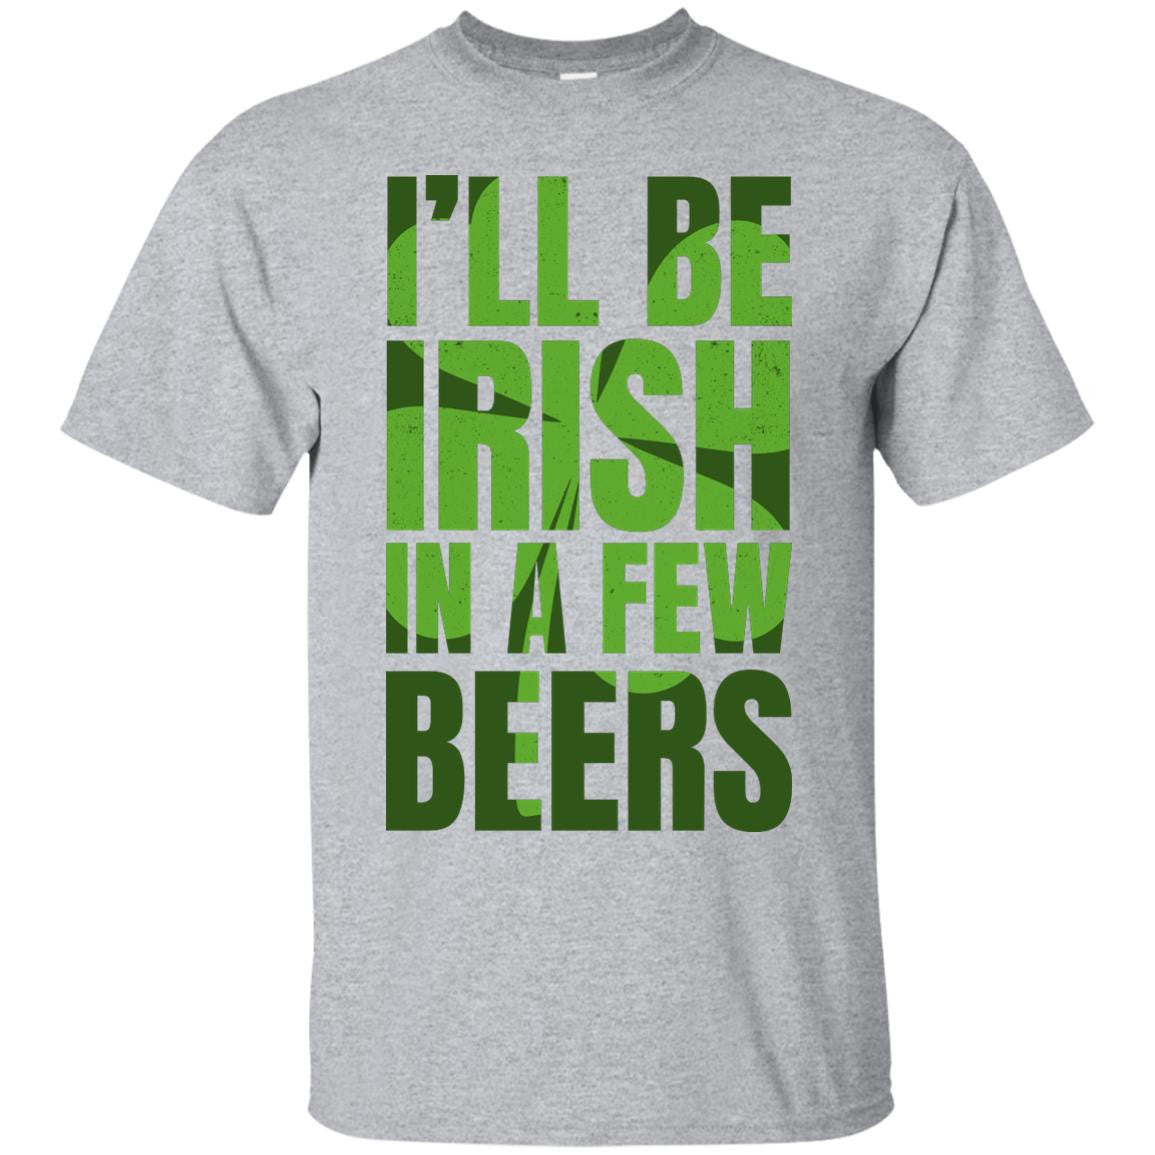 I'll Be Irish In A Few Beers T-Shirt Apparel - The Beer Lodge